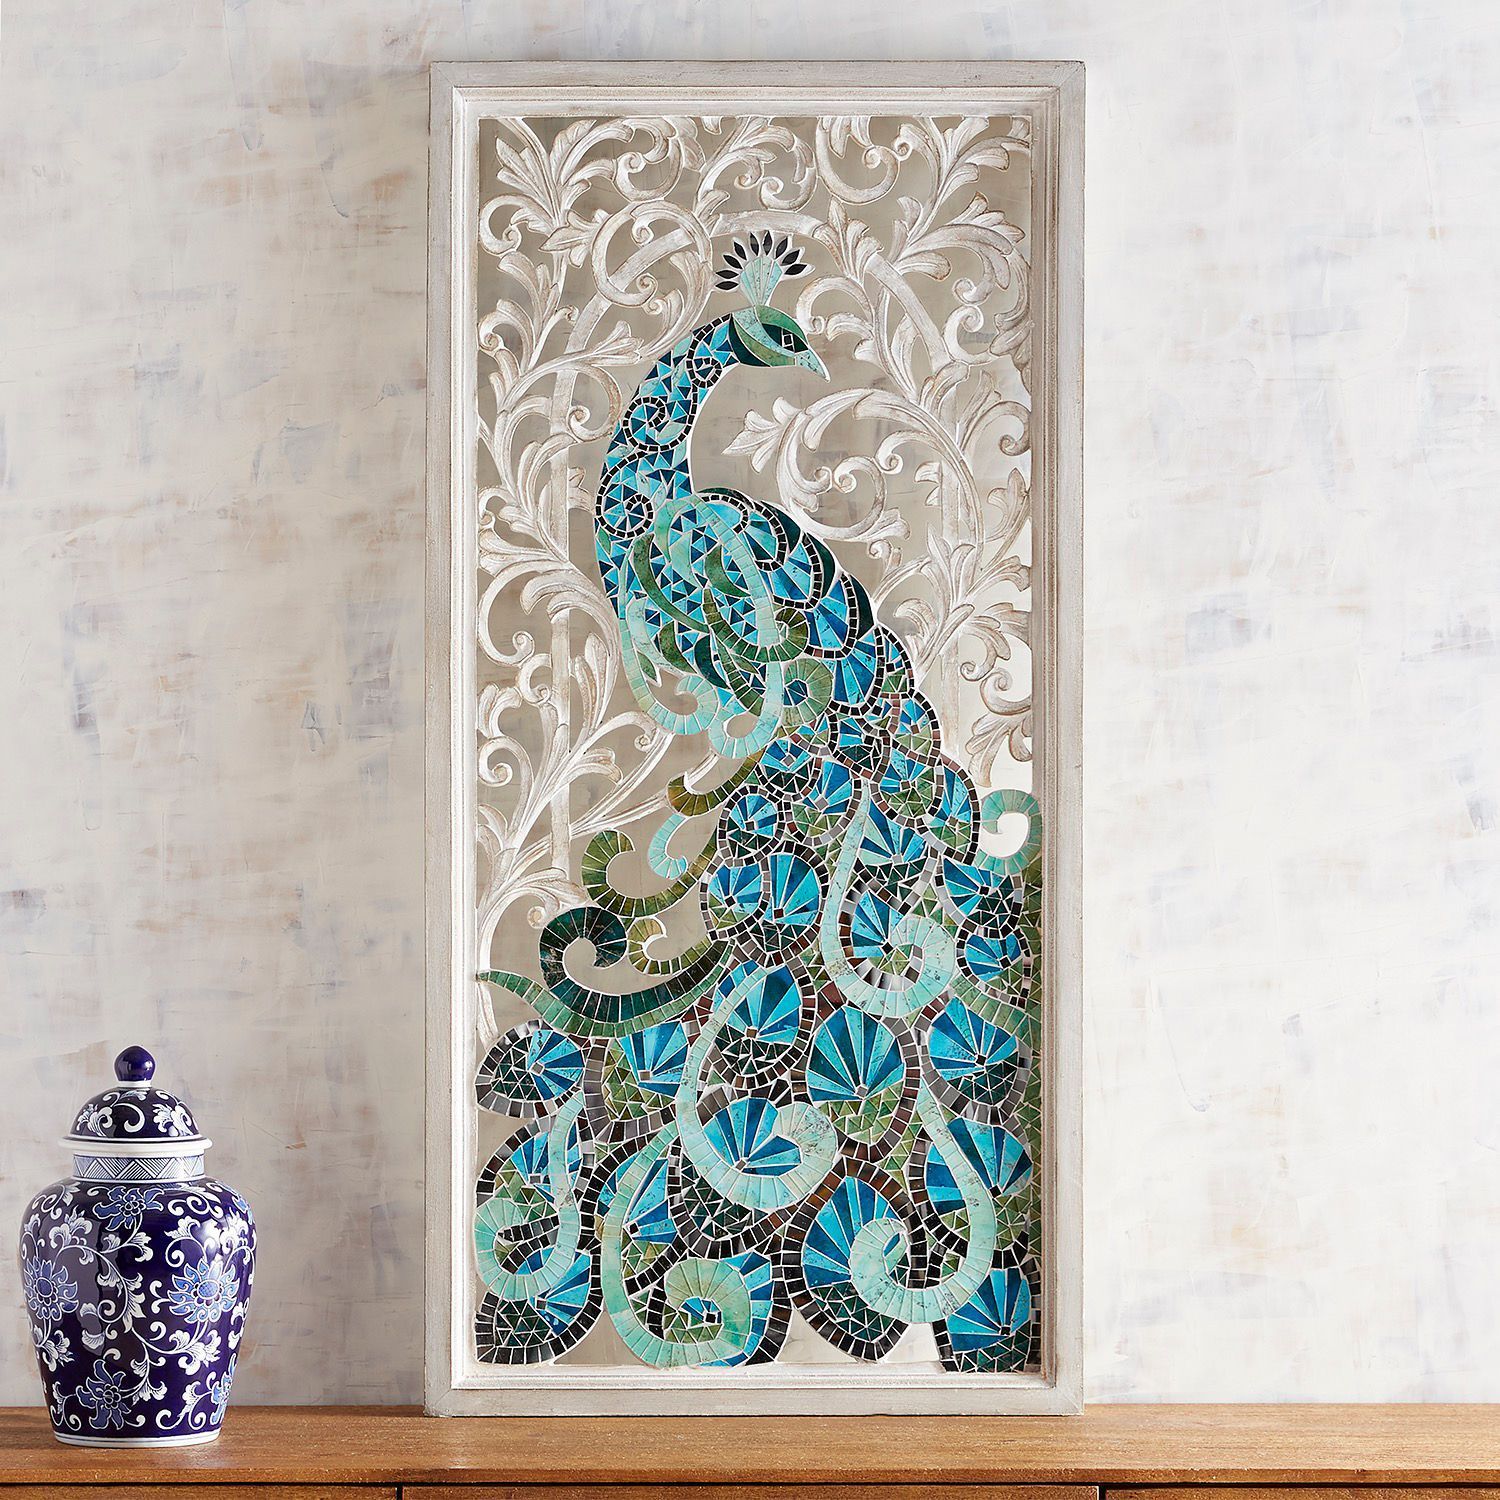 Aqua Peacock Mosaic Wall Panel | Pier 1 Imports | Peacock Wall Art With Regard To Most Popular Pier Wall Art (Gallery 20 of 20)